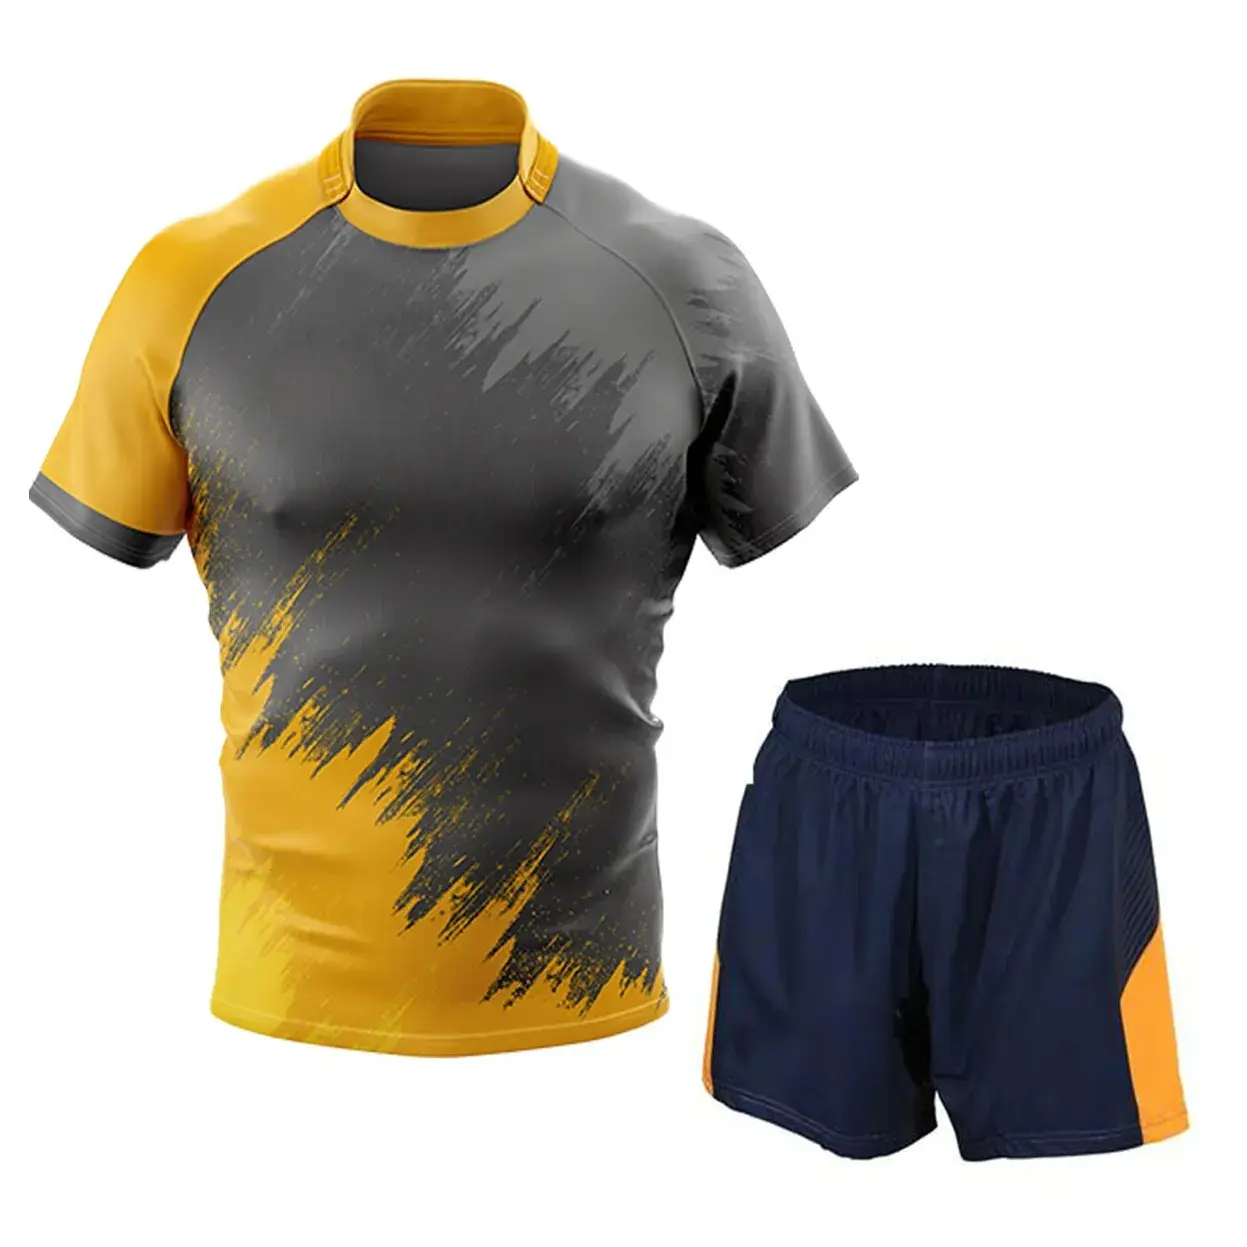 Best Design Cheap Price Customized Logo Printing High Quality Team Sports Wear Rugby Uniform In Different Colors